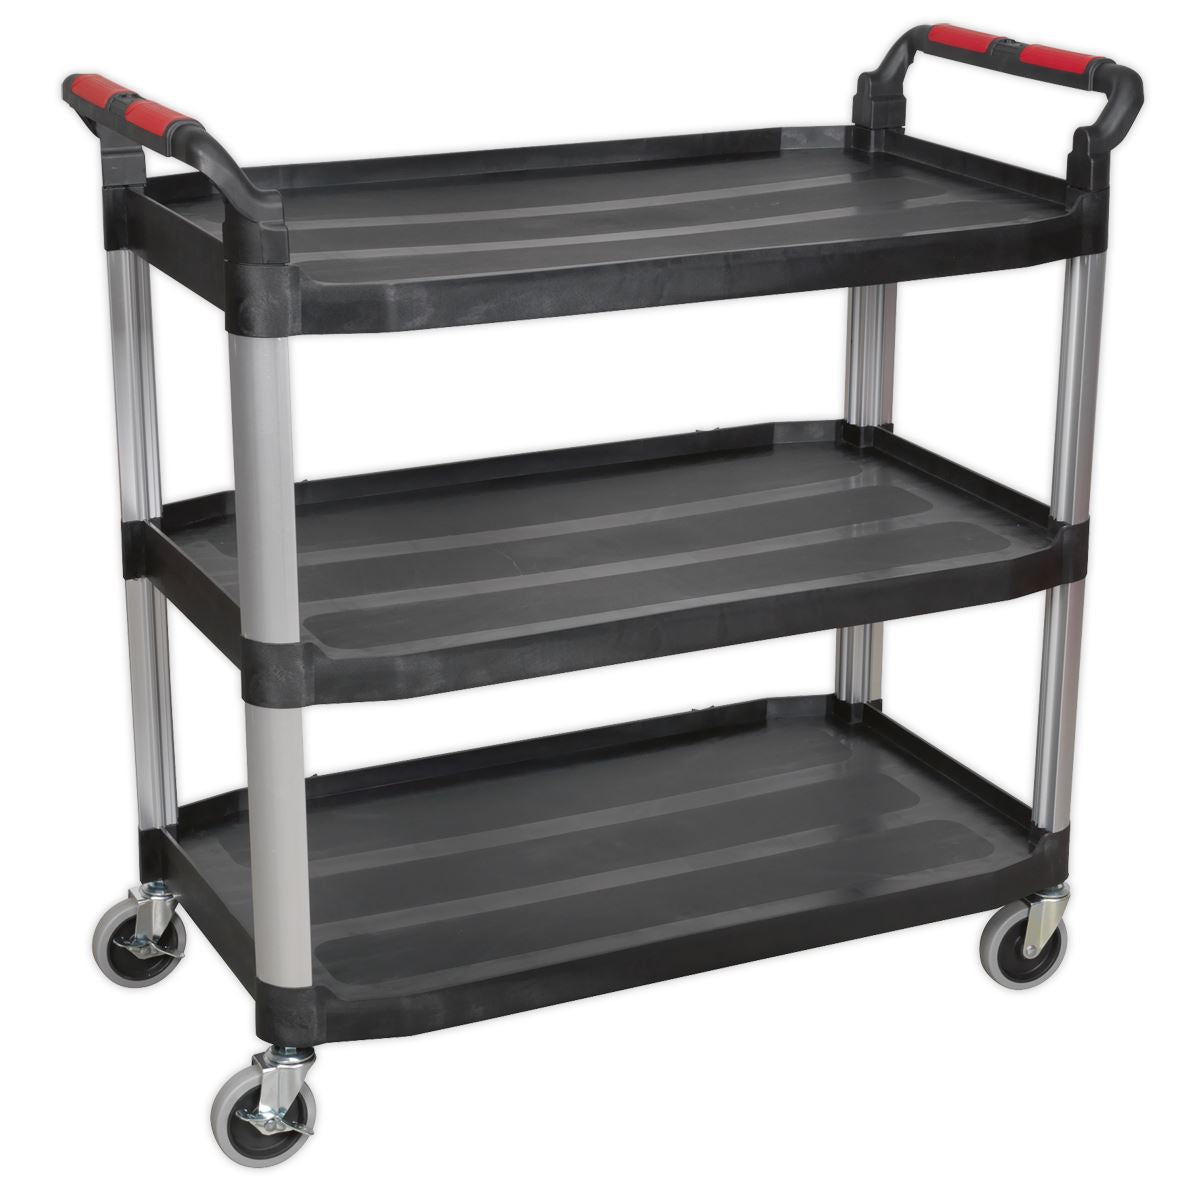 Sealey Workshop Trolley 3-Level Composite - 3 Wall